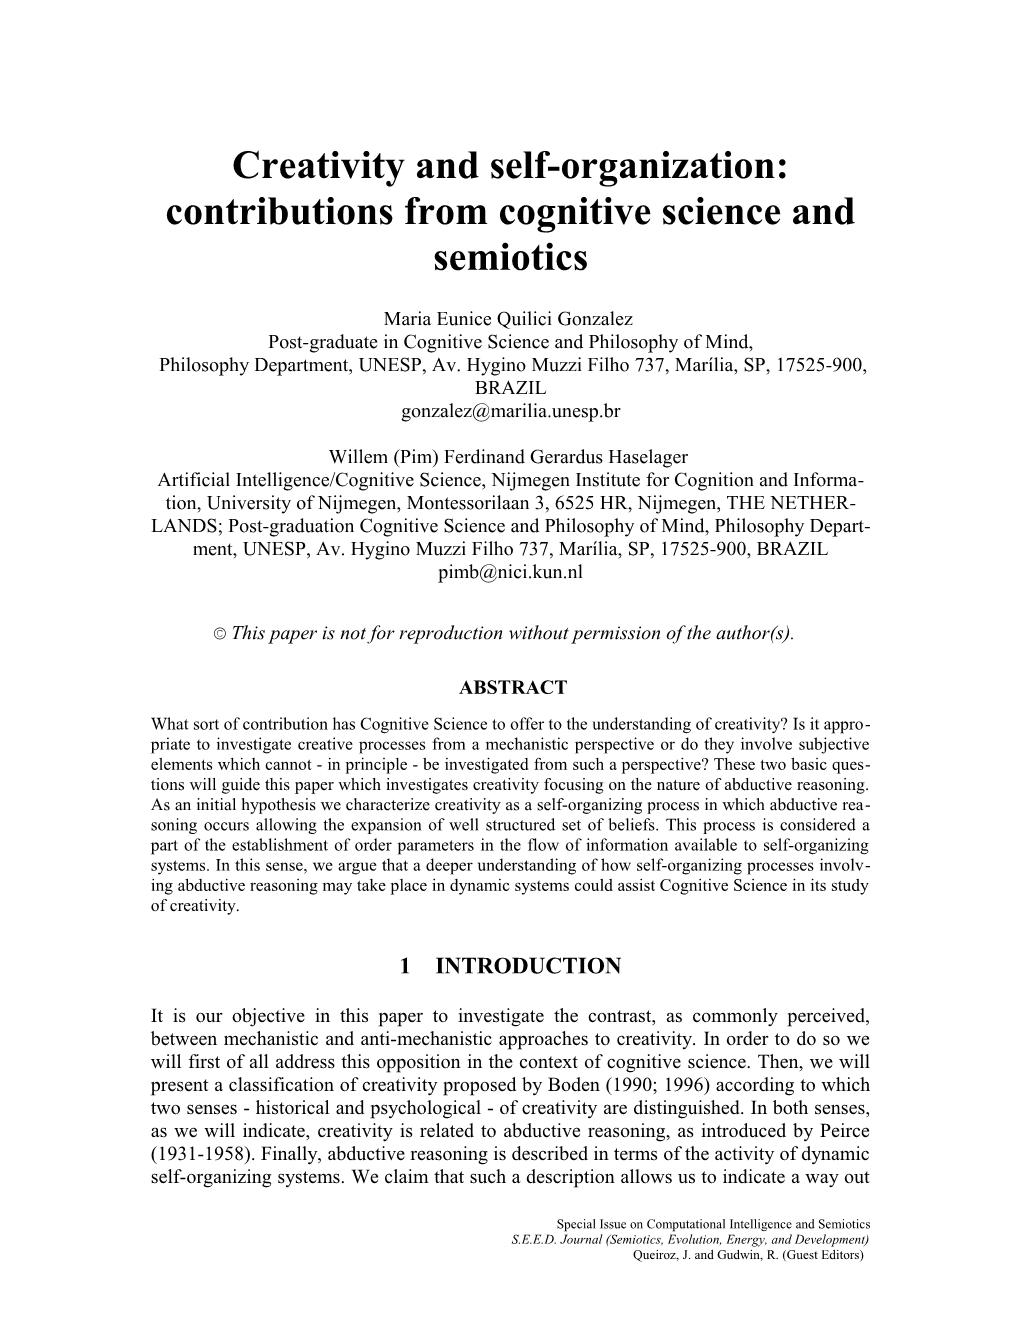 Creativity and Self-Organization: Any Contribution from Cognitive Science